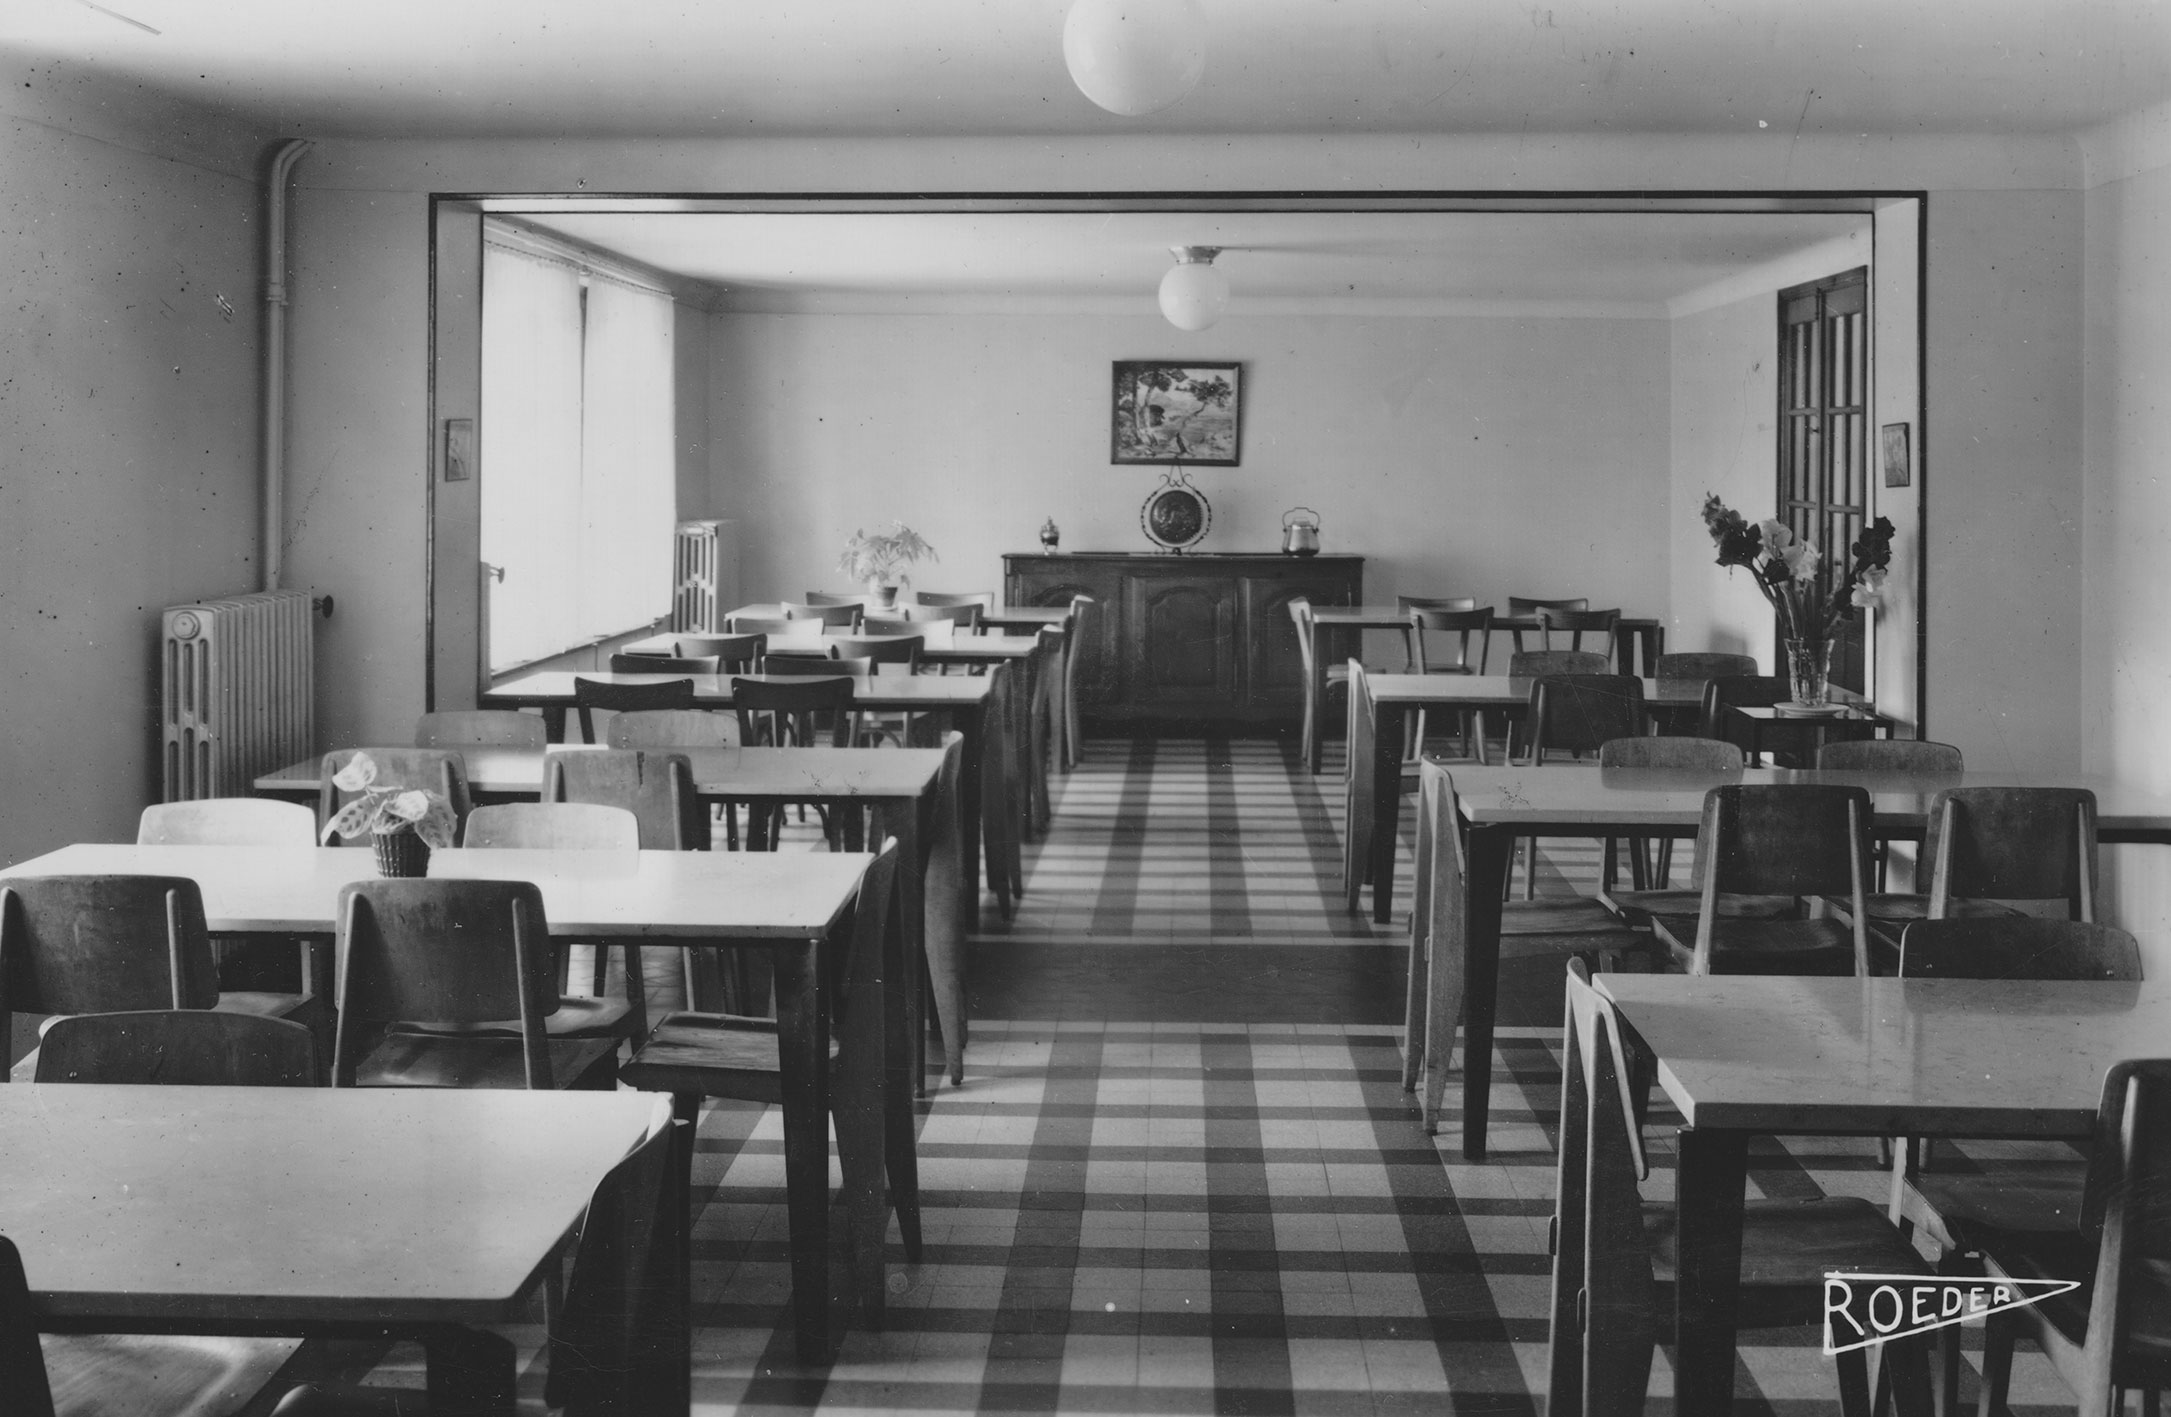 Sanitarium at Flavigny-sur-Moselle. Refectory equipped with Tout Bois chairs and Flavigny tables, ca. 1945.